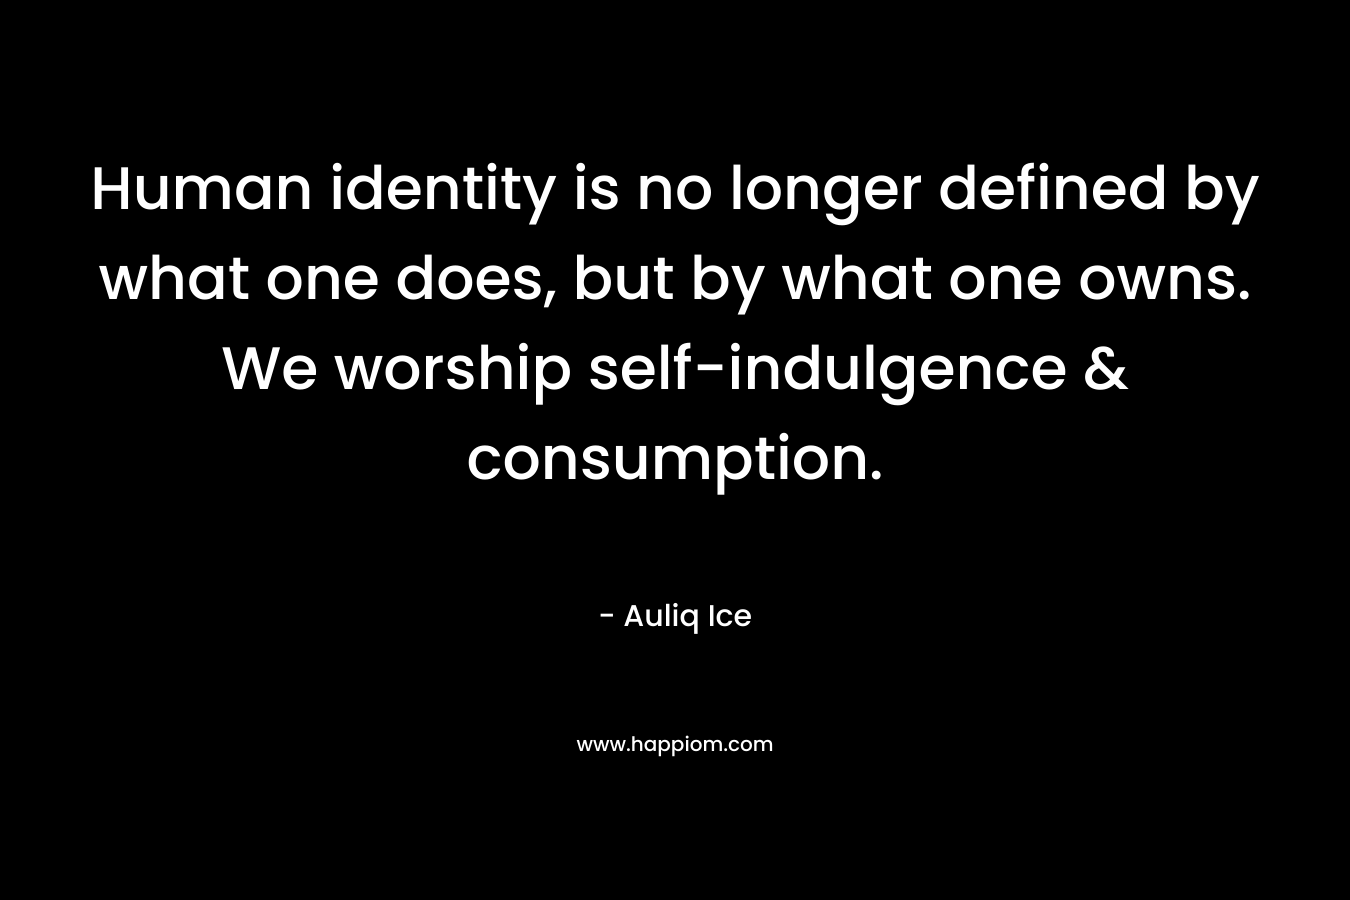 Human identity is no longer defined by what one does, but by what one owns. We worship self-indulgence & consumption.